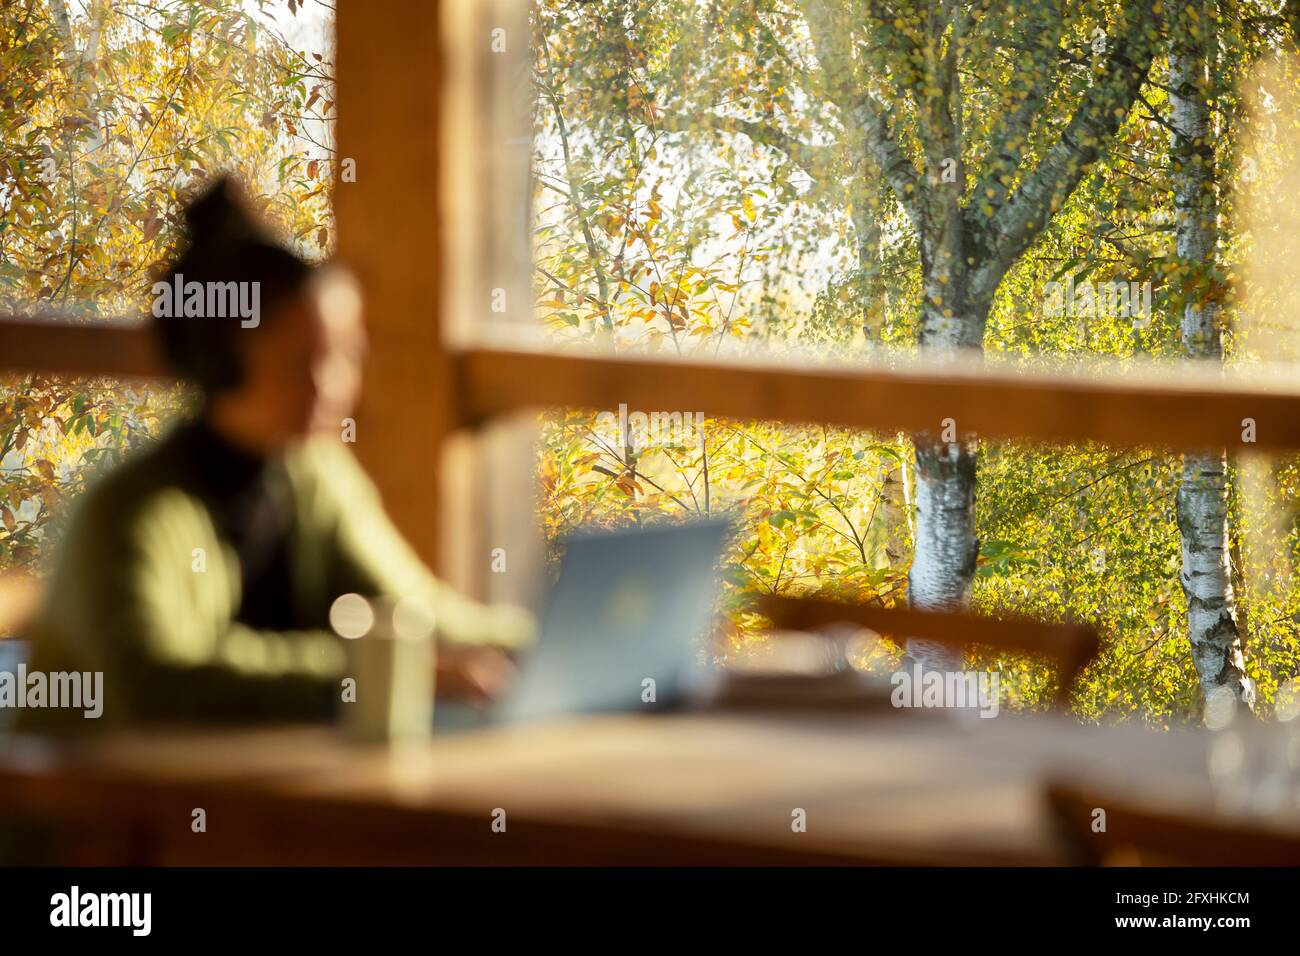 Woman working at laptop in cafe with autumn tree view Stock Photo